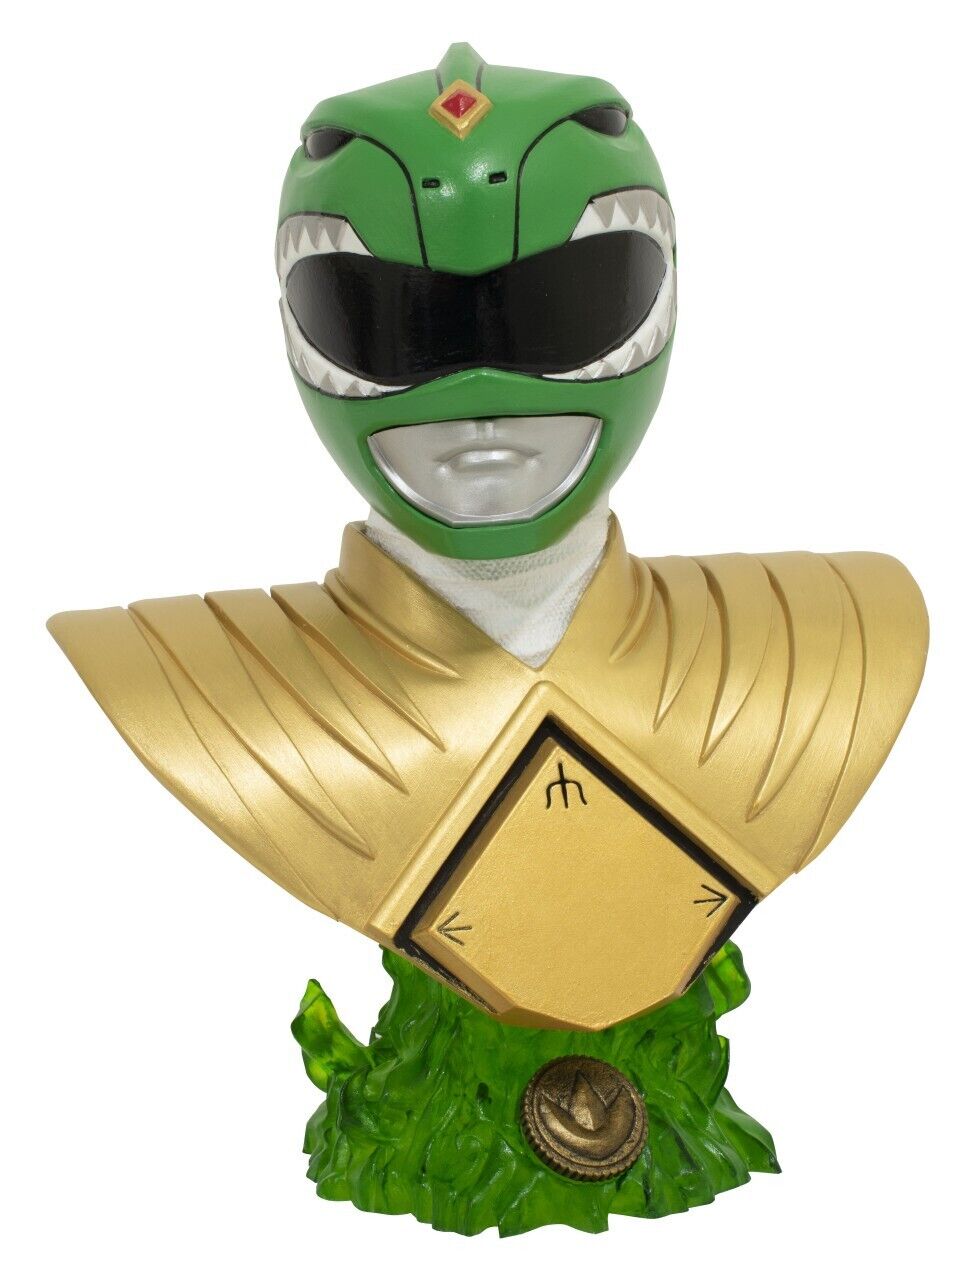 Power Rangers Green Ranger 1/2 Scale Bust- Diamond Select limited to 1,000